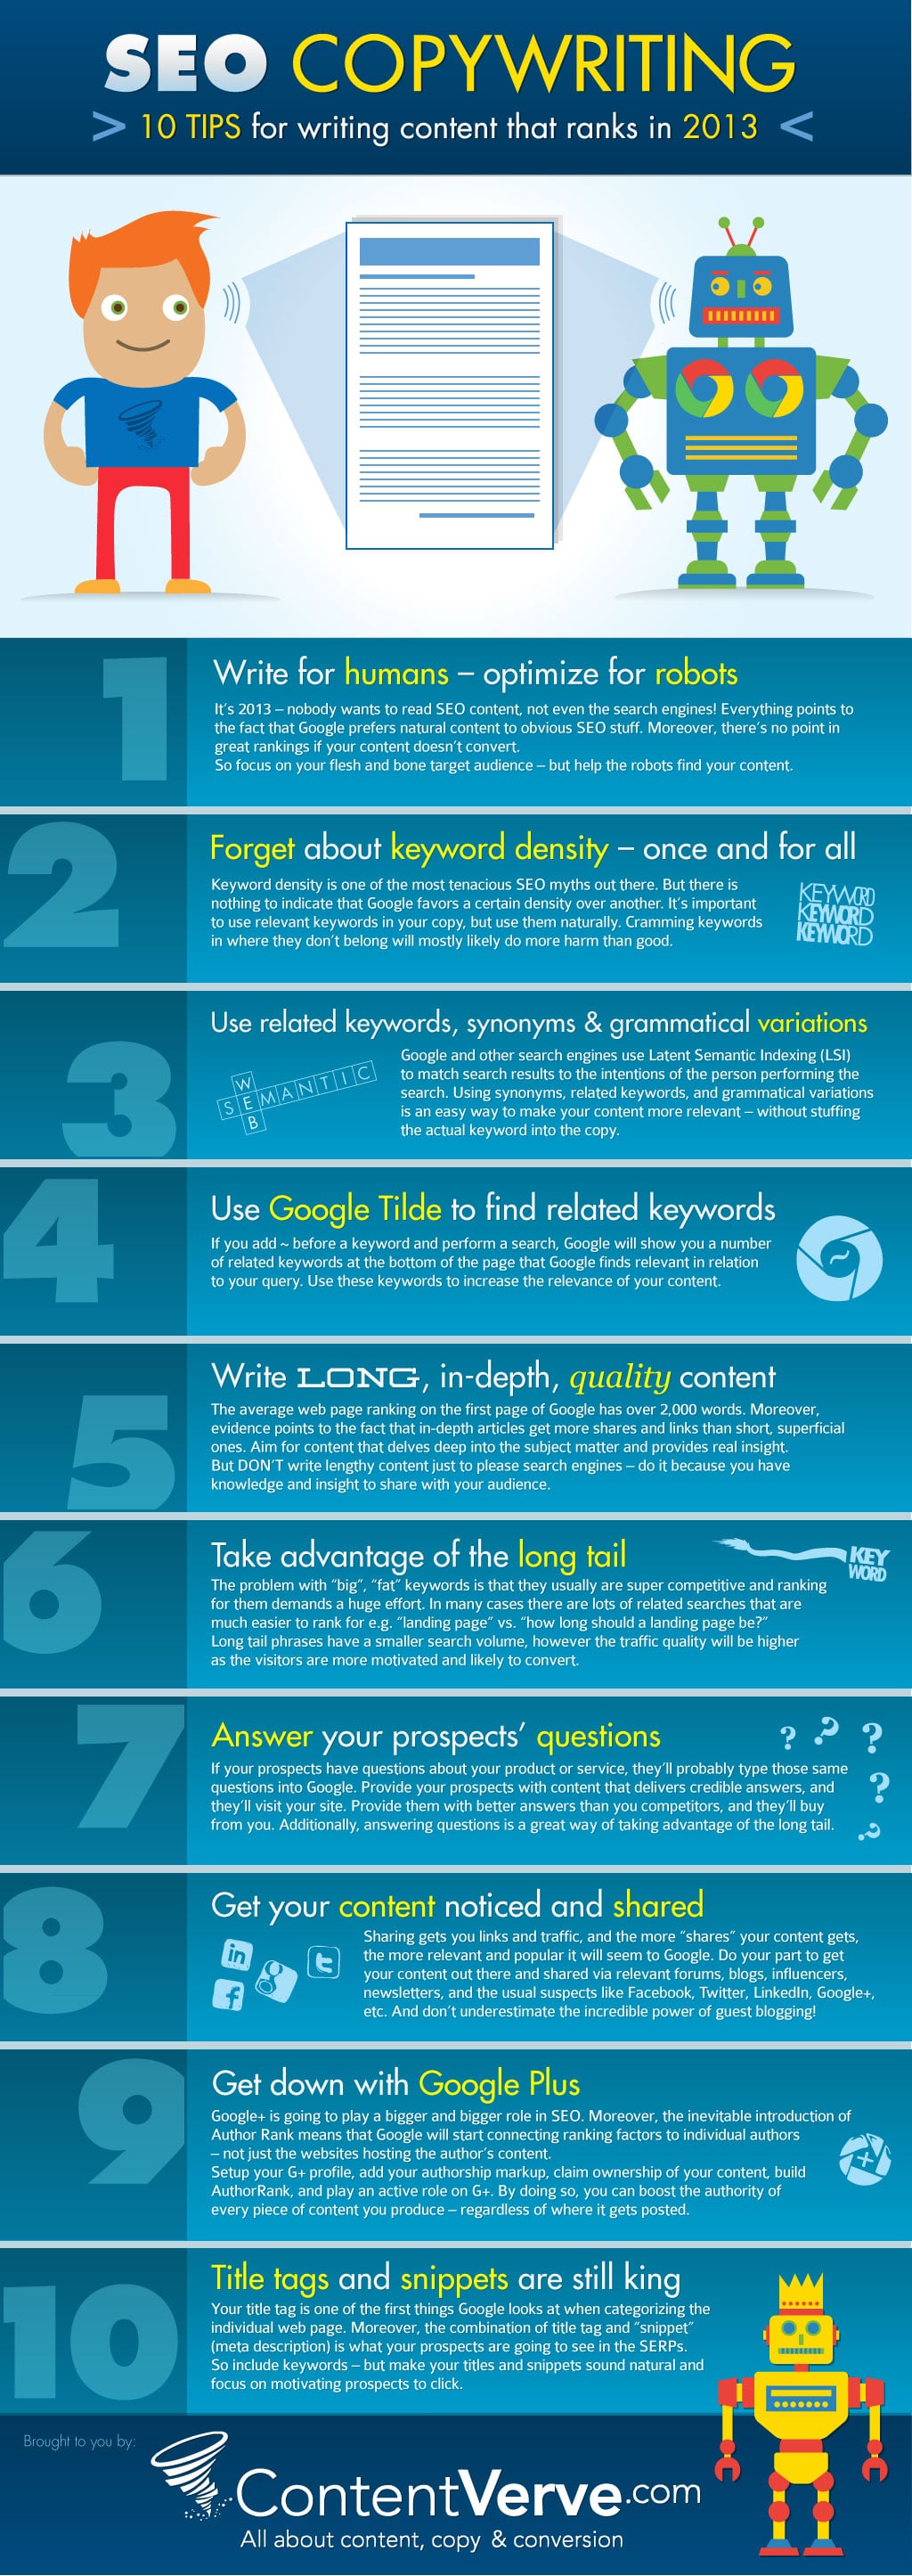 10 SEO Copywriting Tips That Will Help Your Content Rank [Infographic]